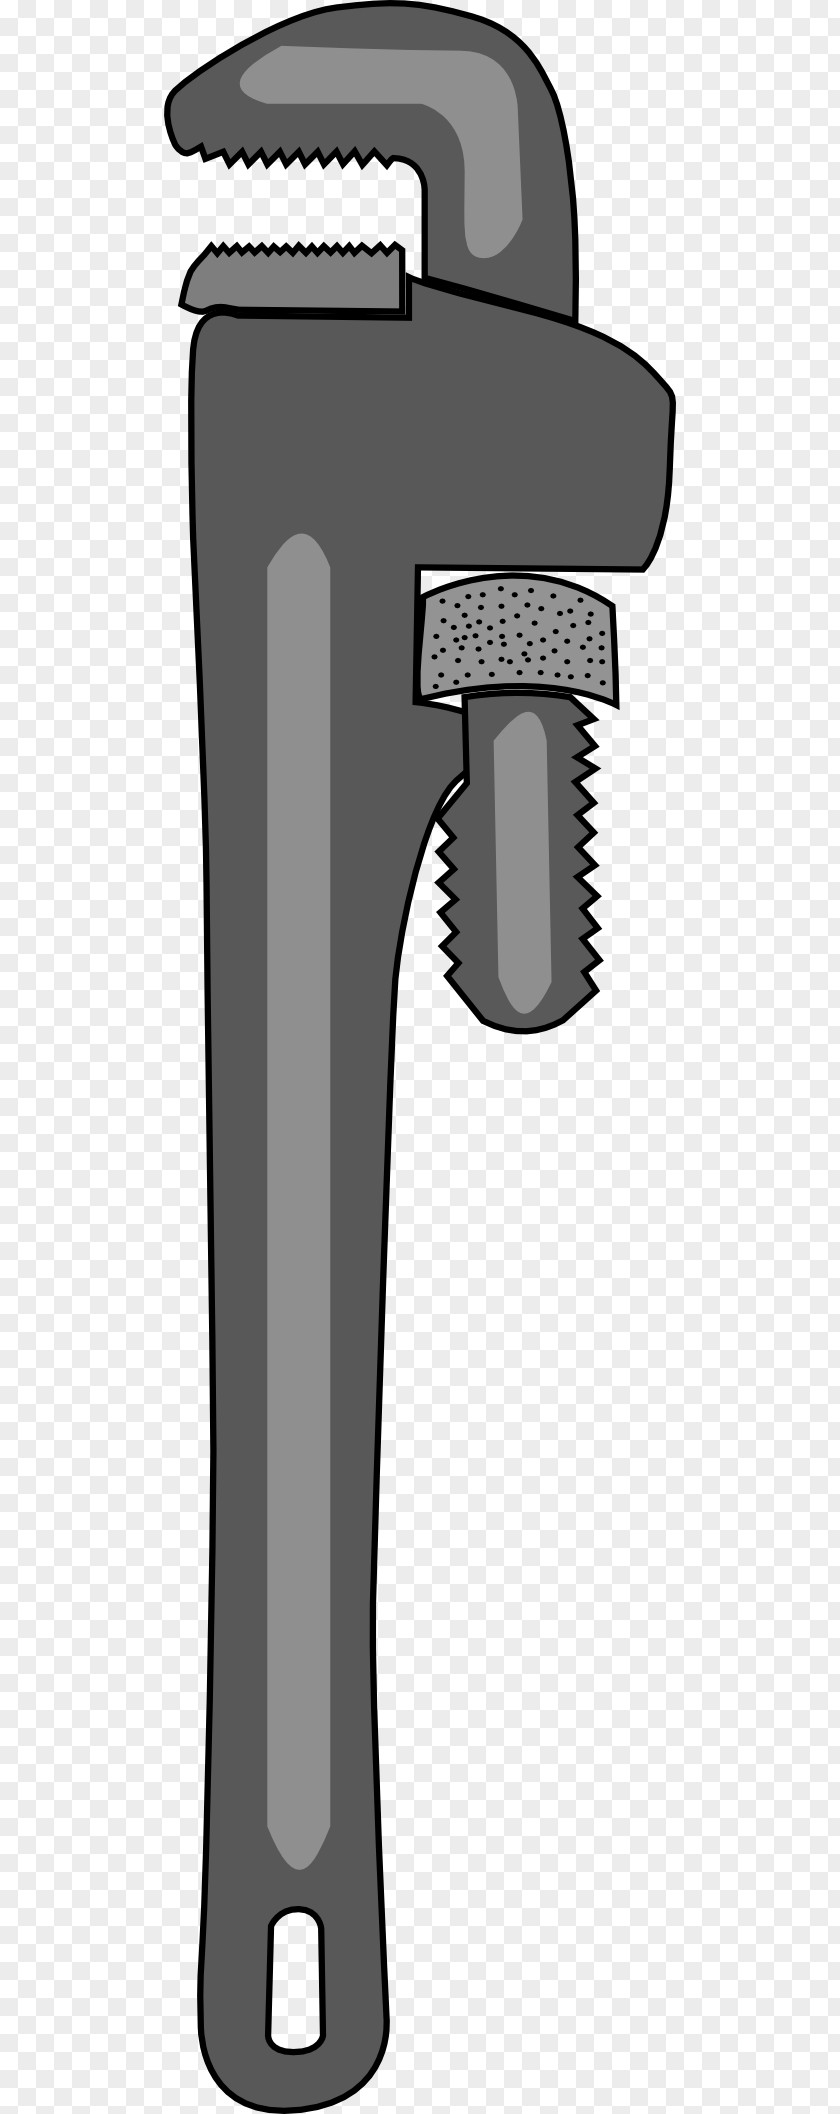 Plumber Pipes Cliparts Pipe Wrench Plumbing Clip Art PNG